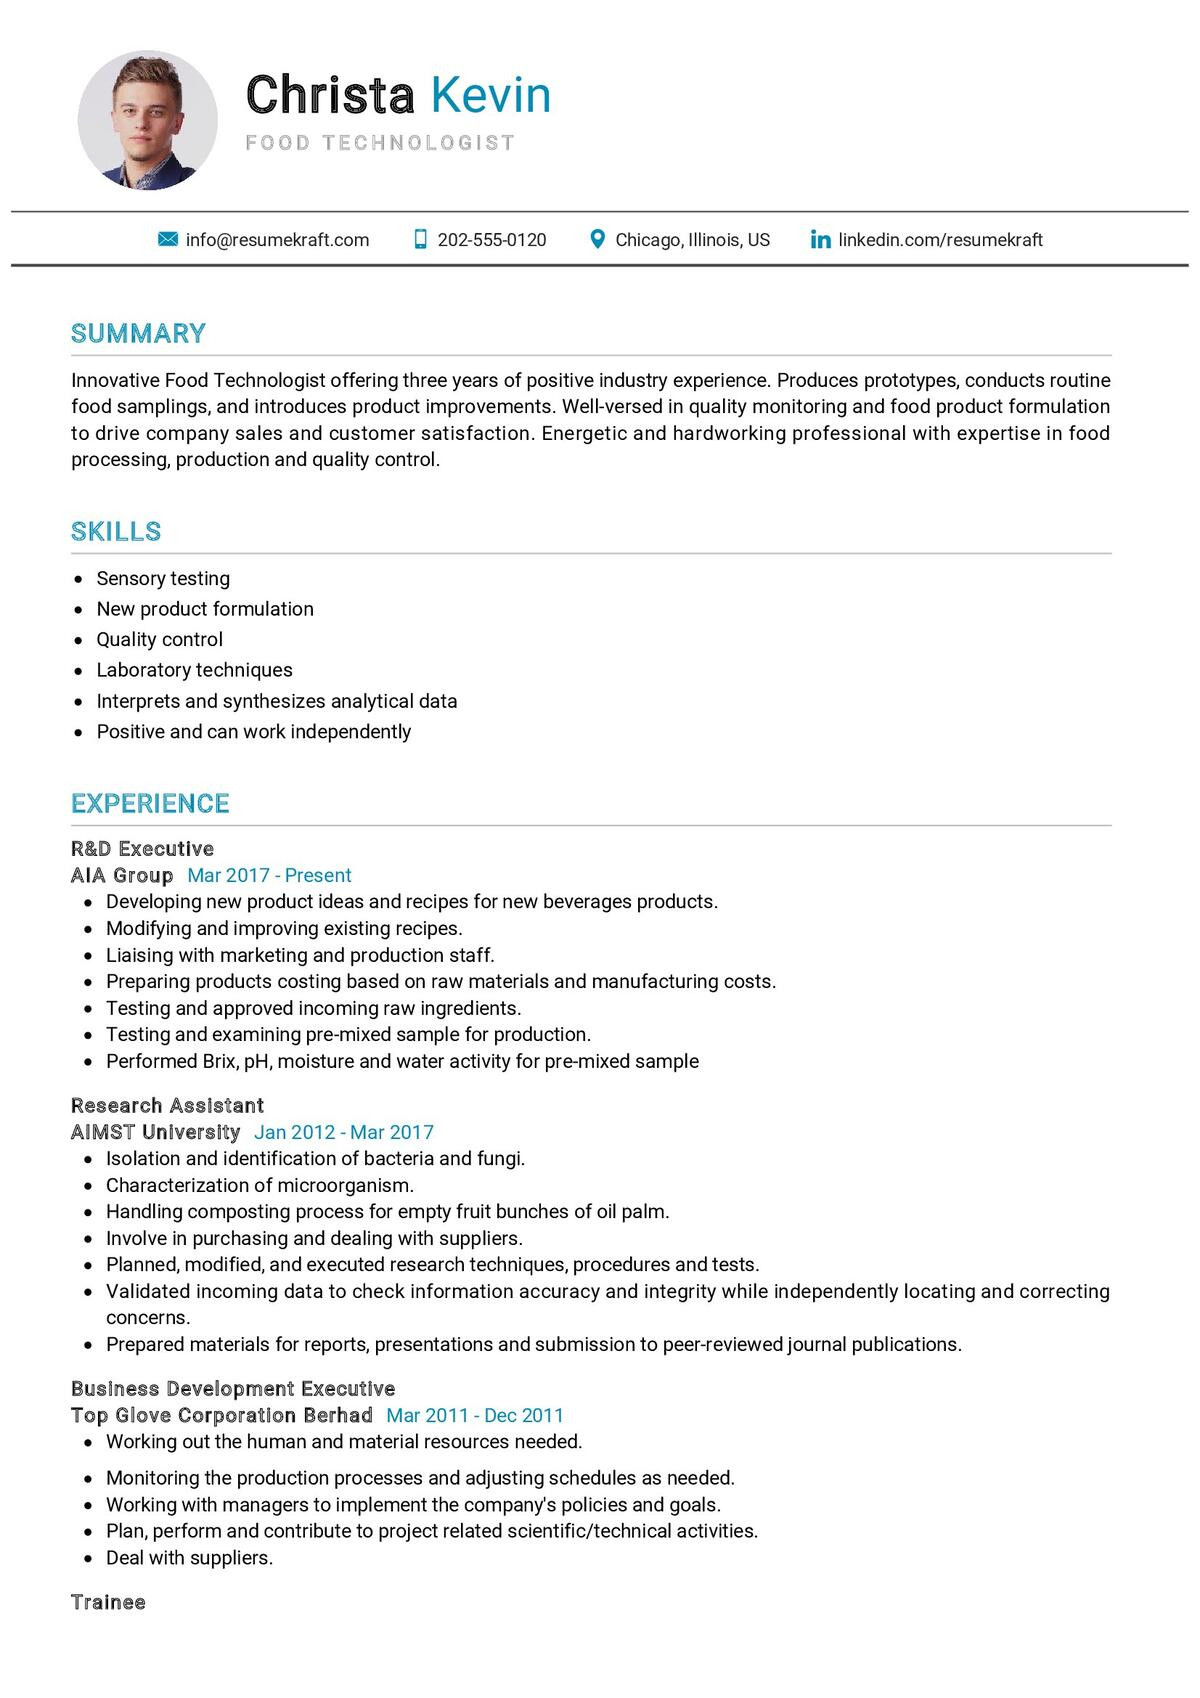 Sample Resume with No Experience From Food Job Food Technologist Resume Sample 2021 Writing Guide – Resumekraft